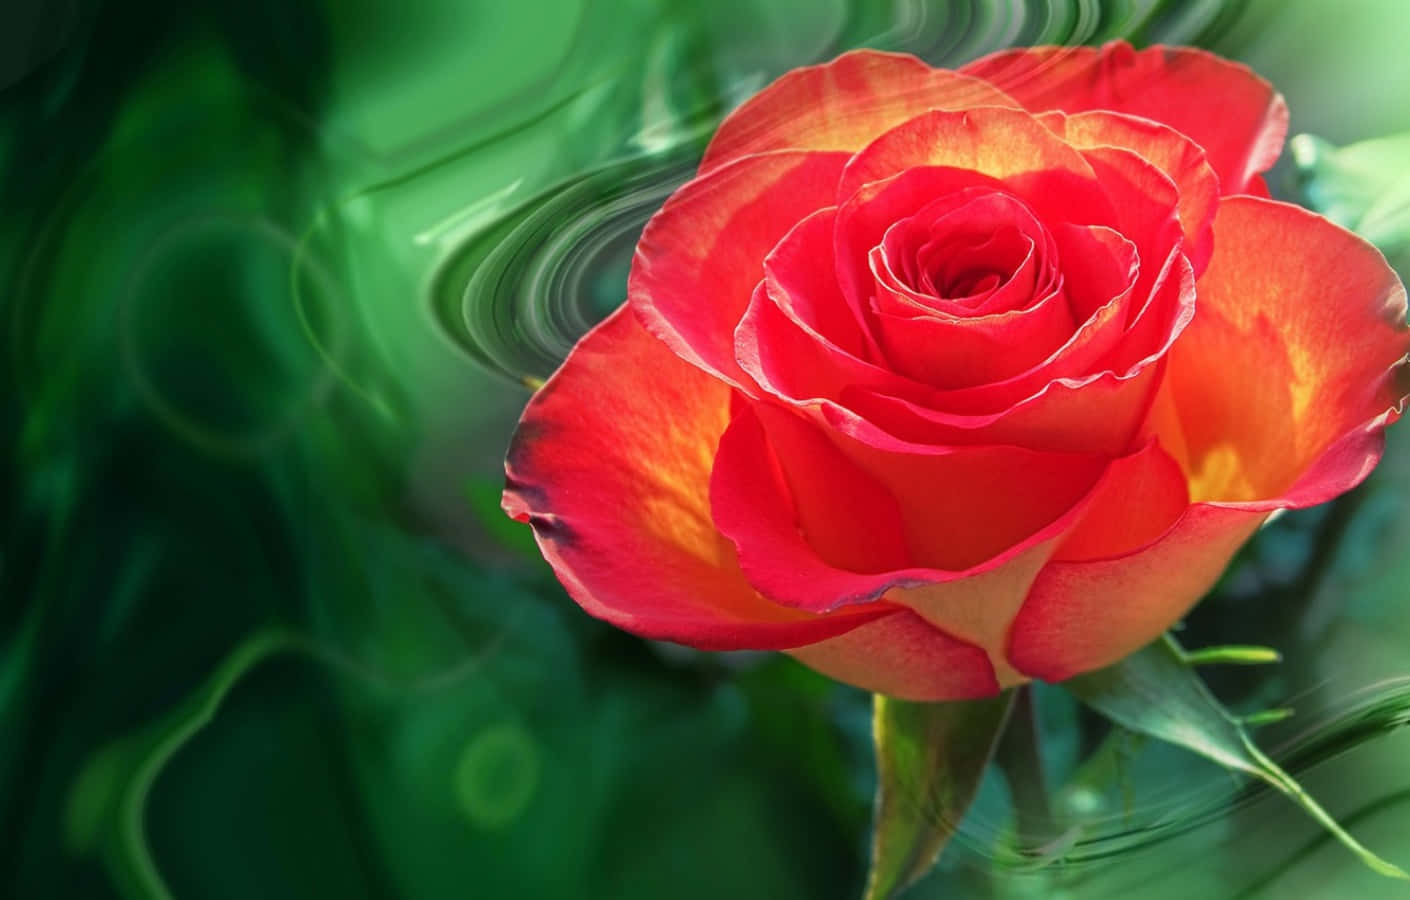 A Delicate and Beautiful Rose